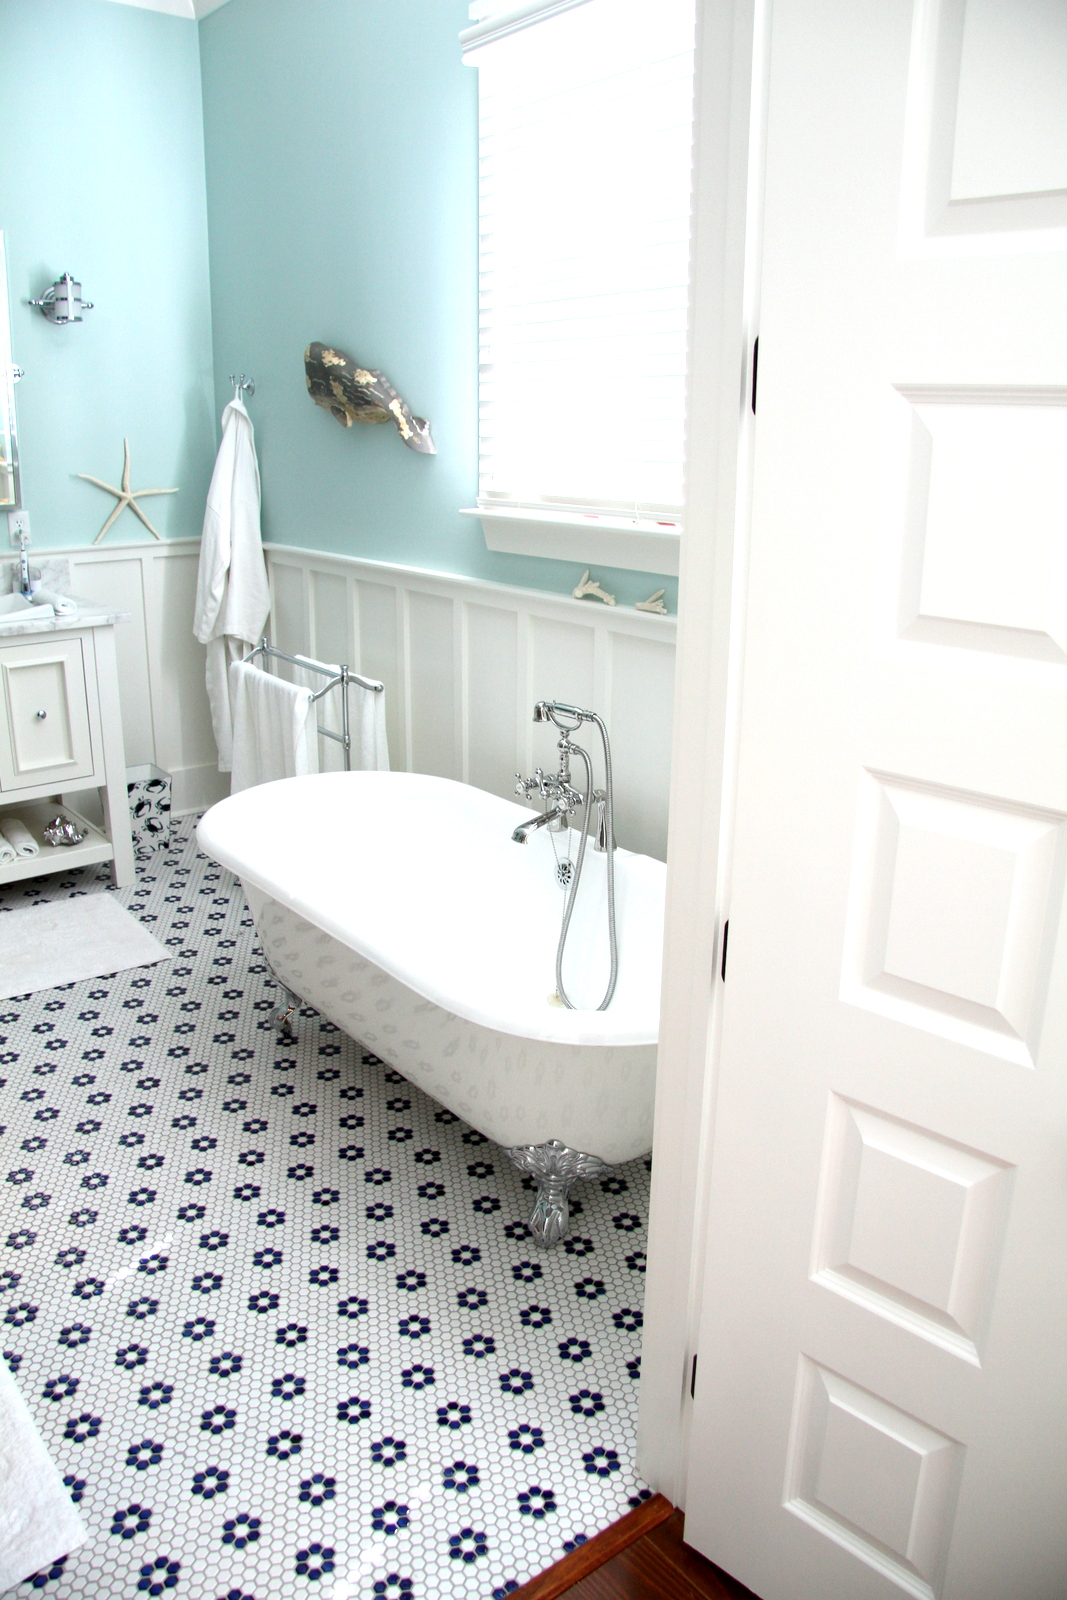 Floor tiles and clawfoot tubs are often used in our traditional Coastal homes from Thornhill Construction.